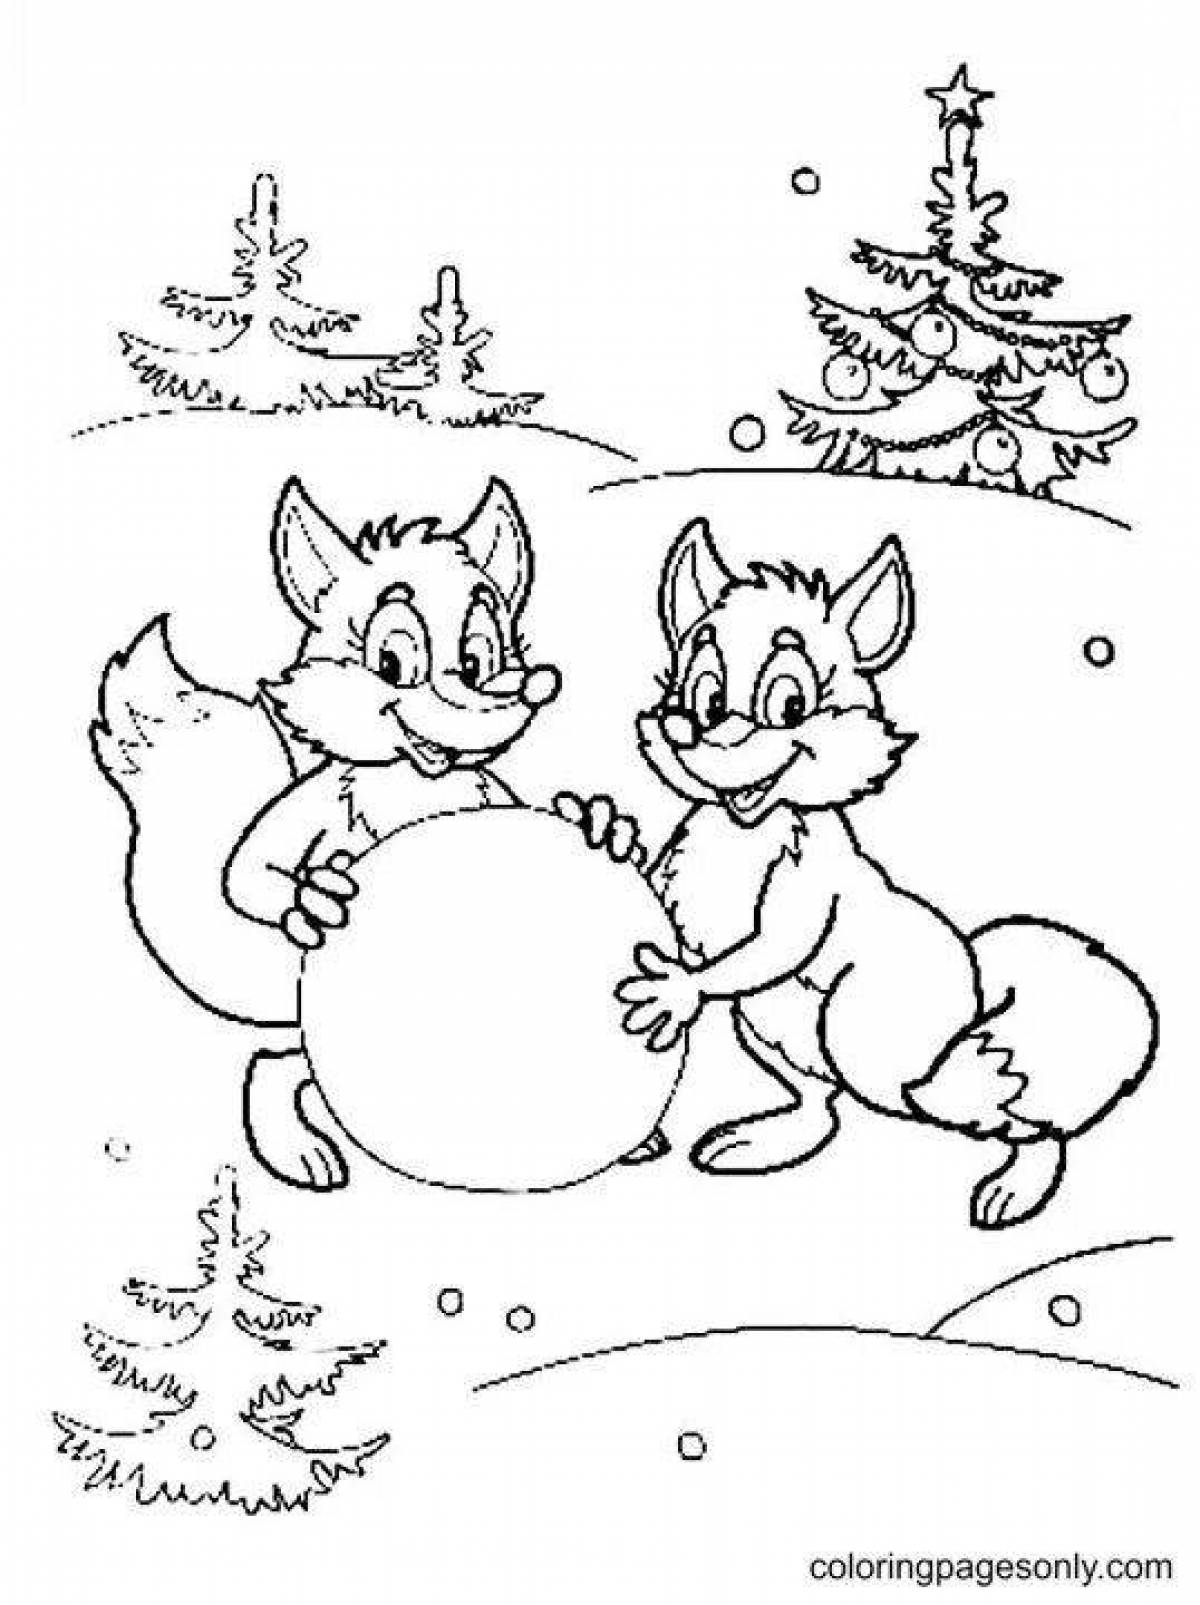 Mysterious animals coloring book in the winter forest